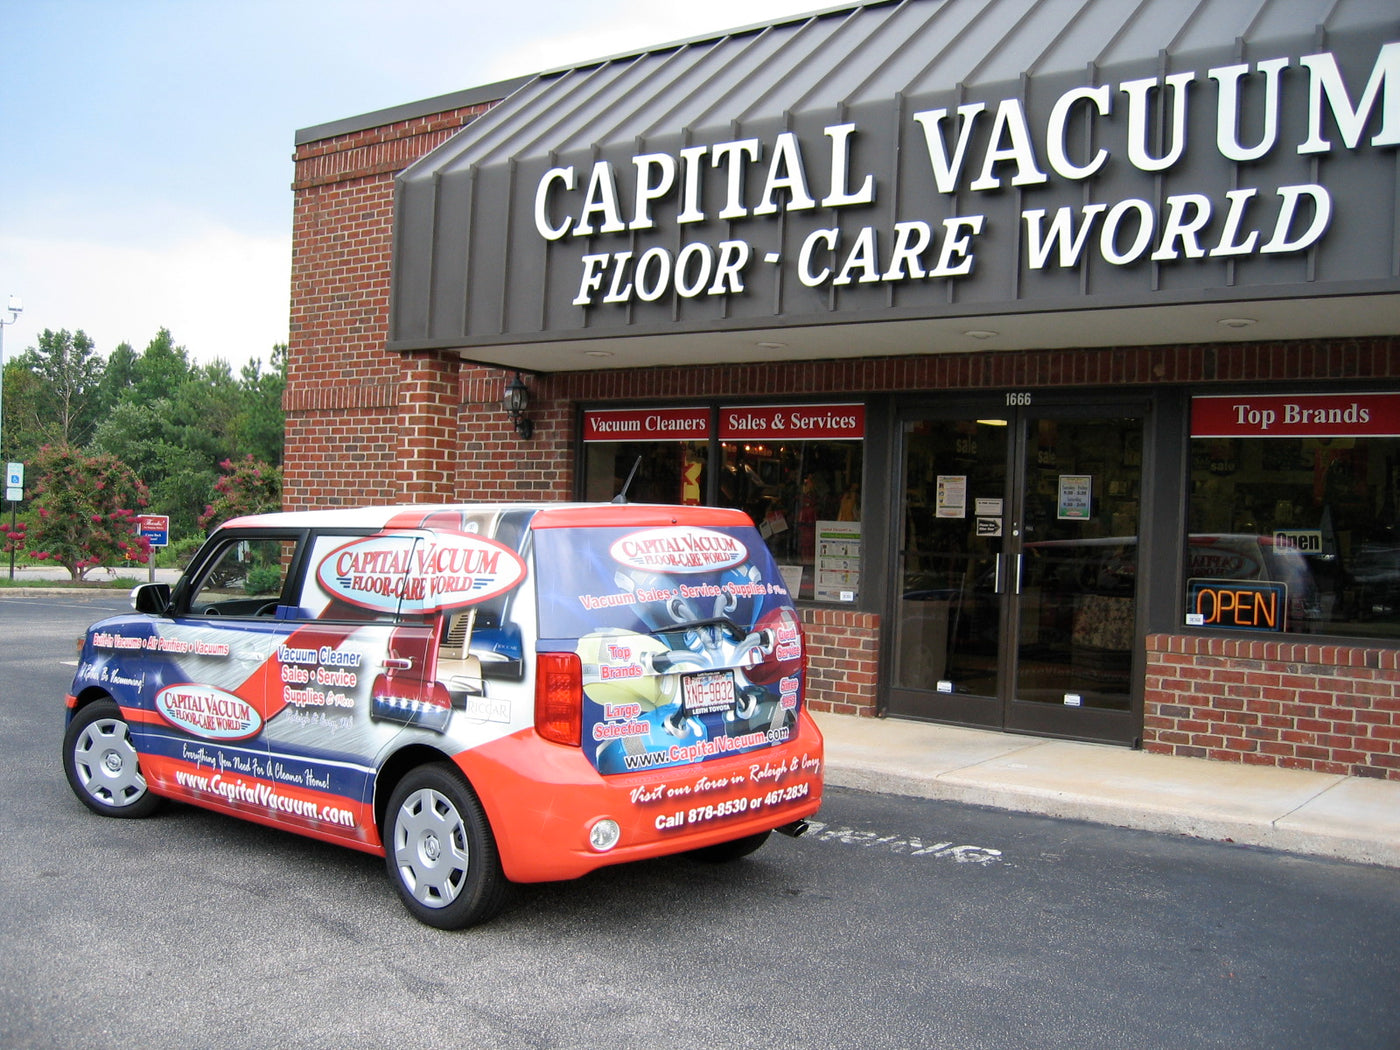 Capital Vacuum Floor-Care World Vacuum Cleaner Stores in Raleigh NC & Cary NC